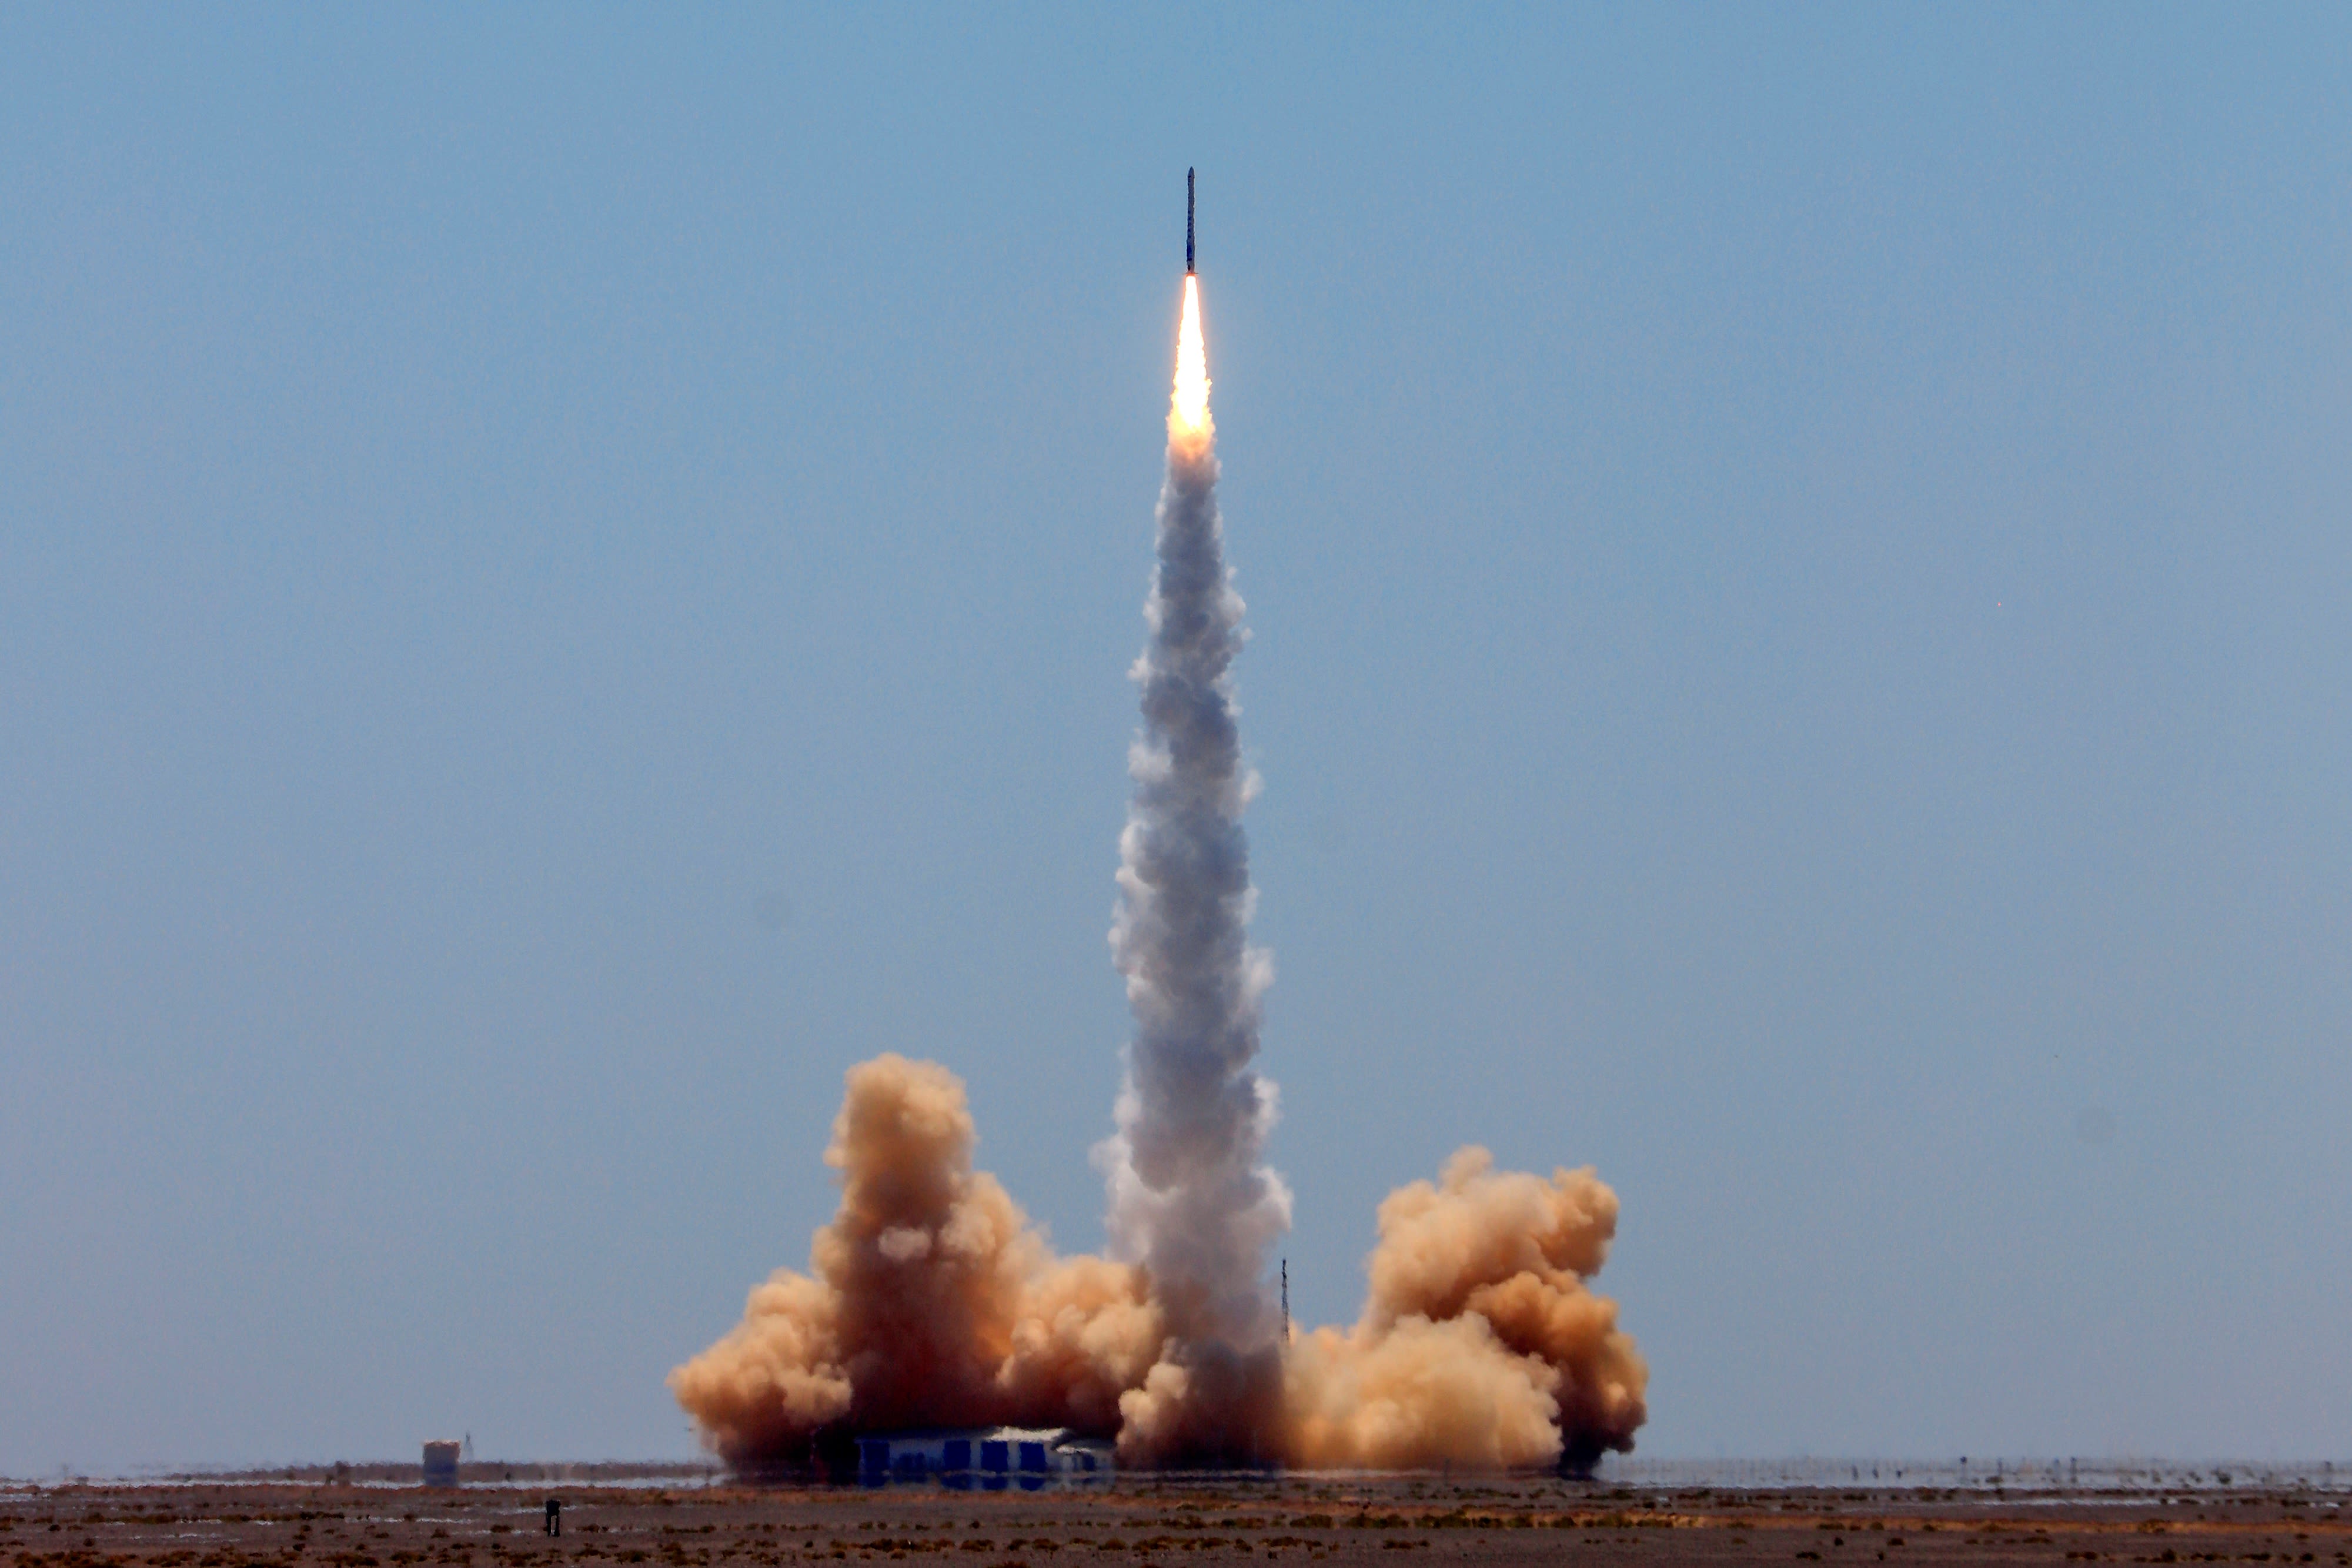 China's Galactic Energy suffers first launch failure - SpaceNews